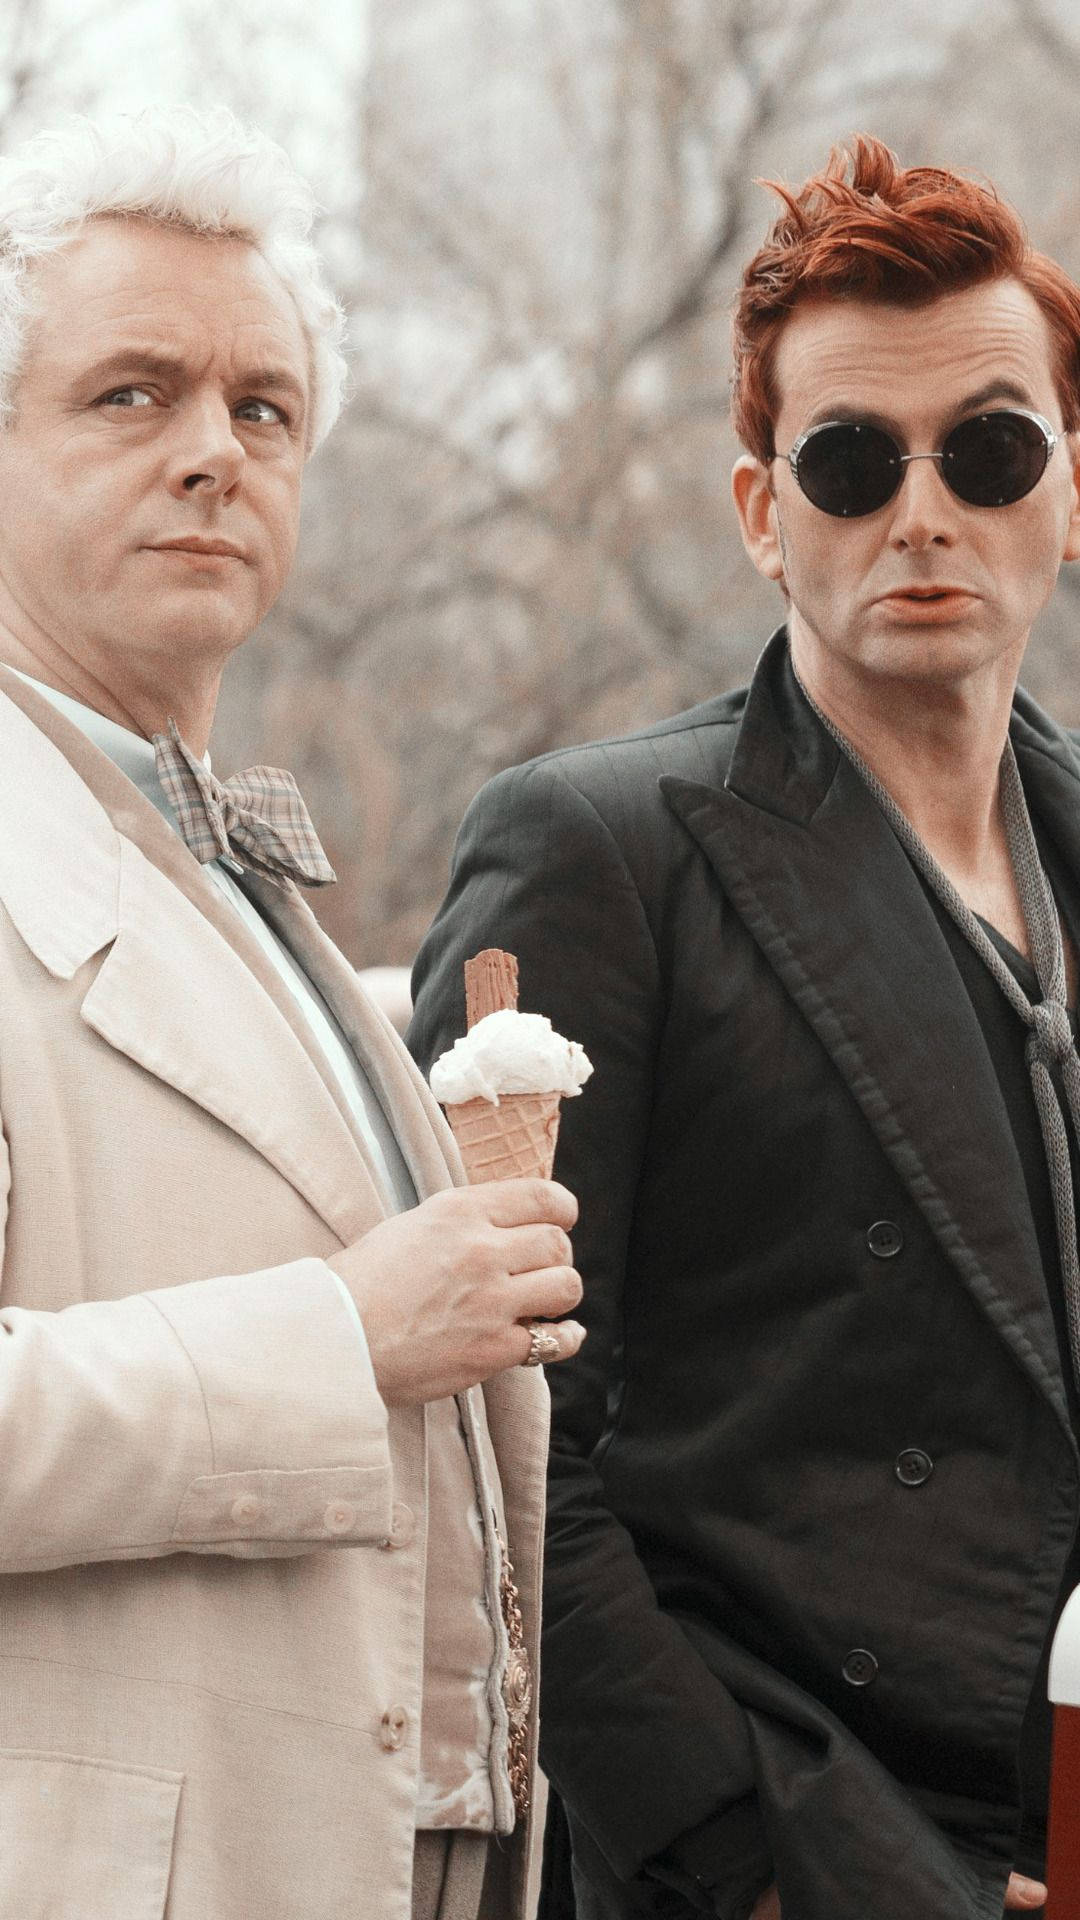 Good Omens Fantasy Comedy Series Background